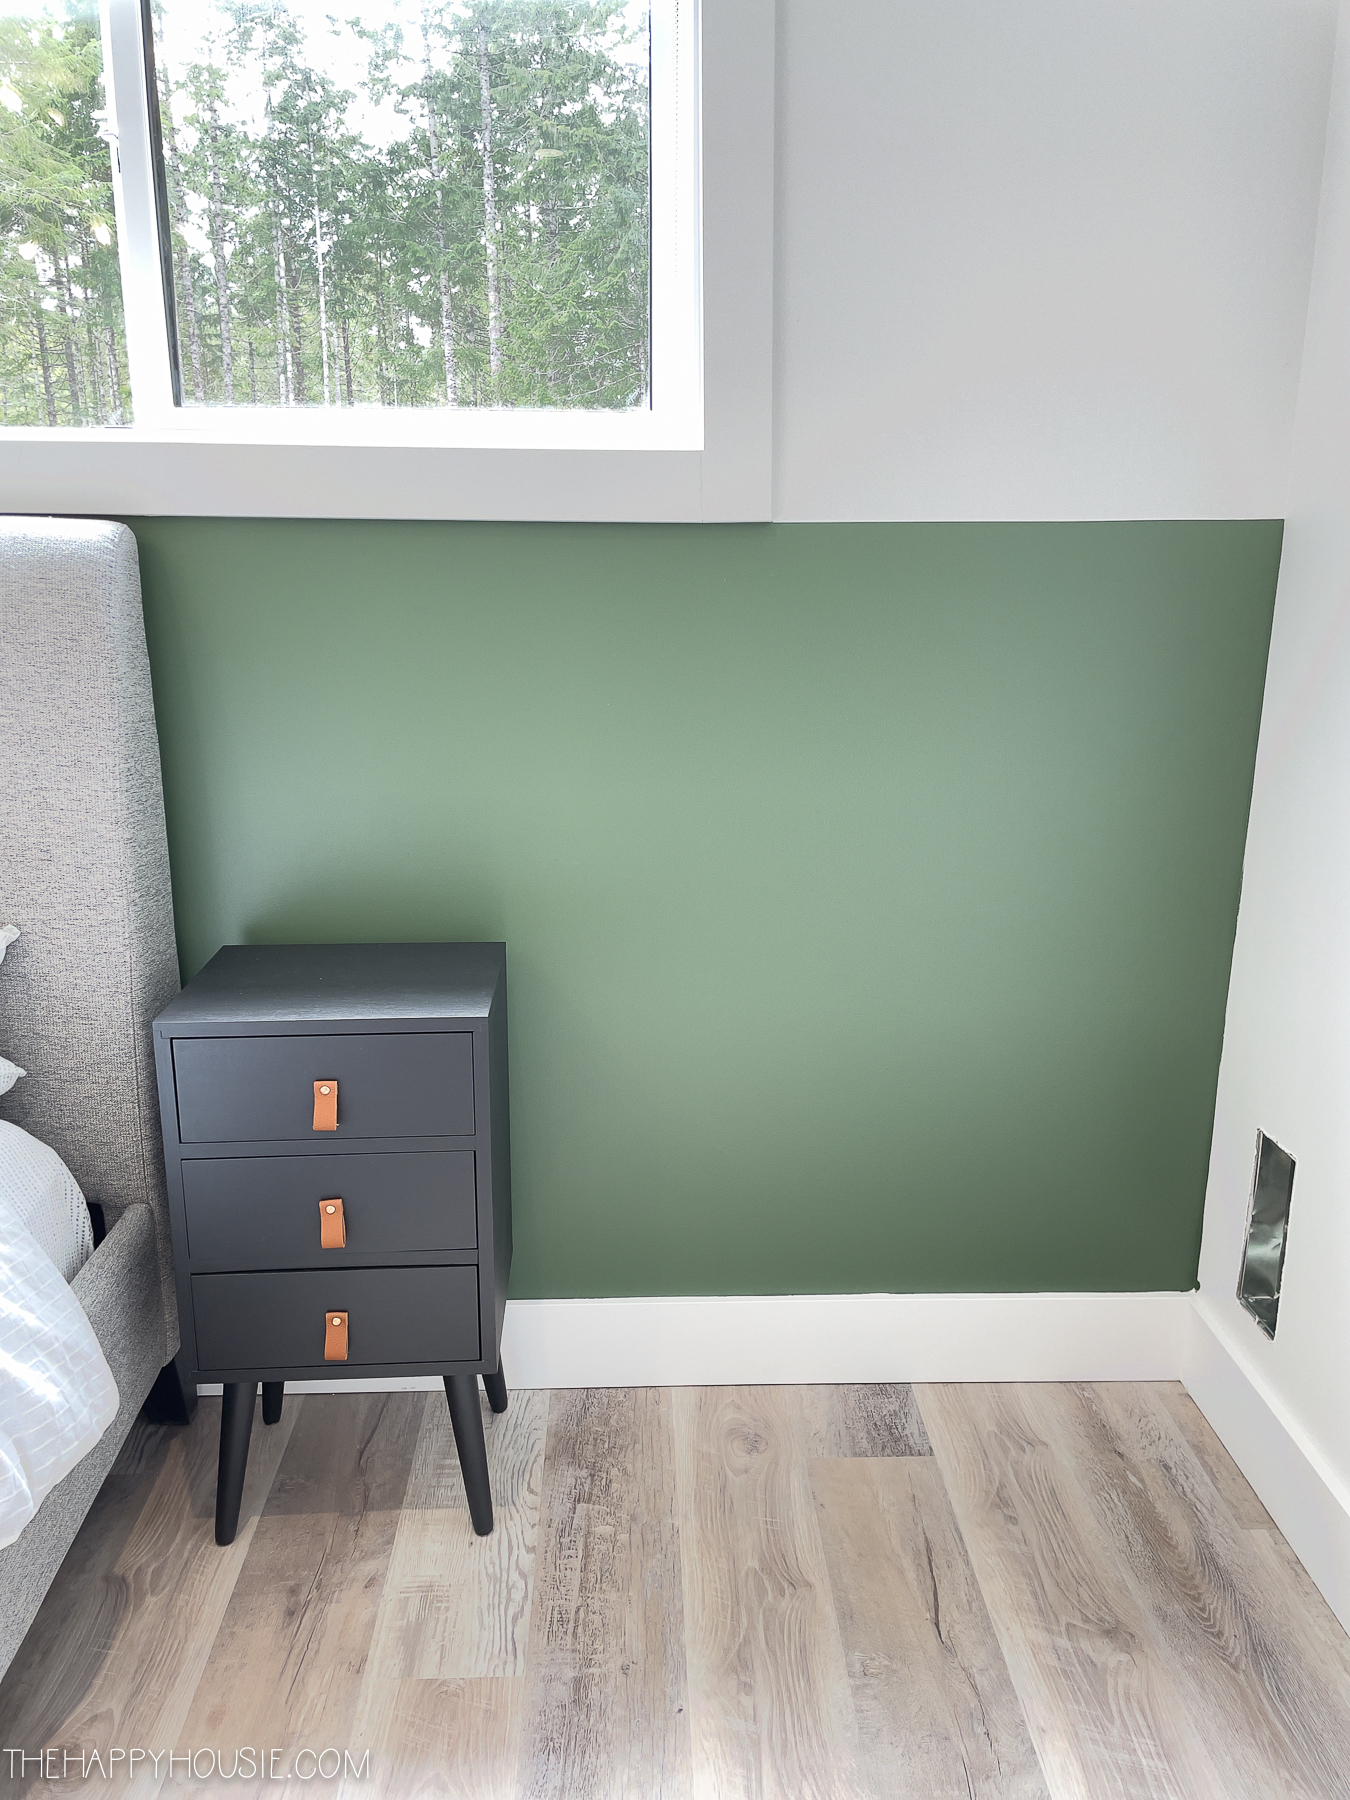 Benjamin Moore Peale Green painted on half wall with black nightstand in front